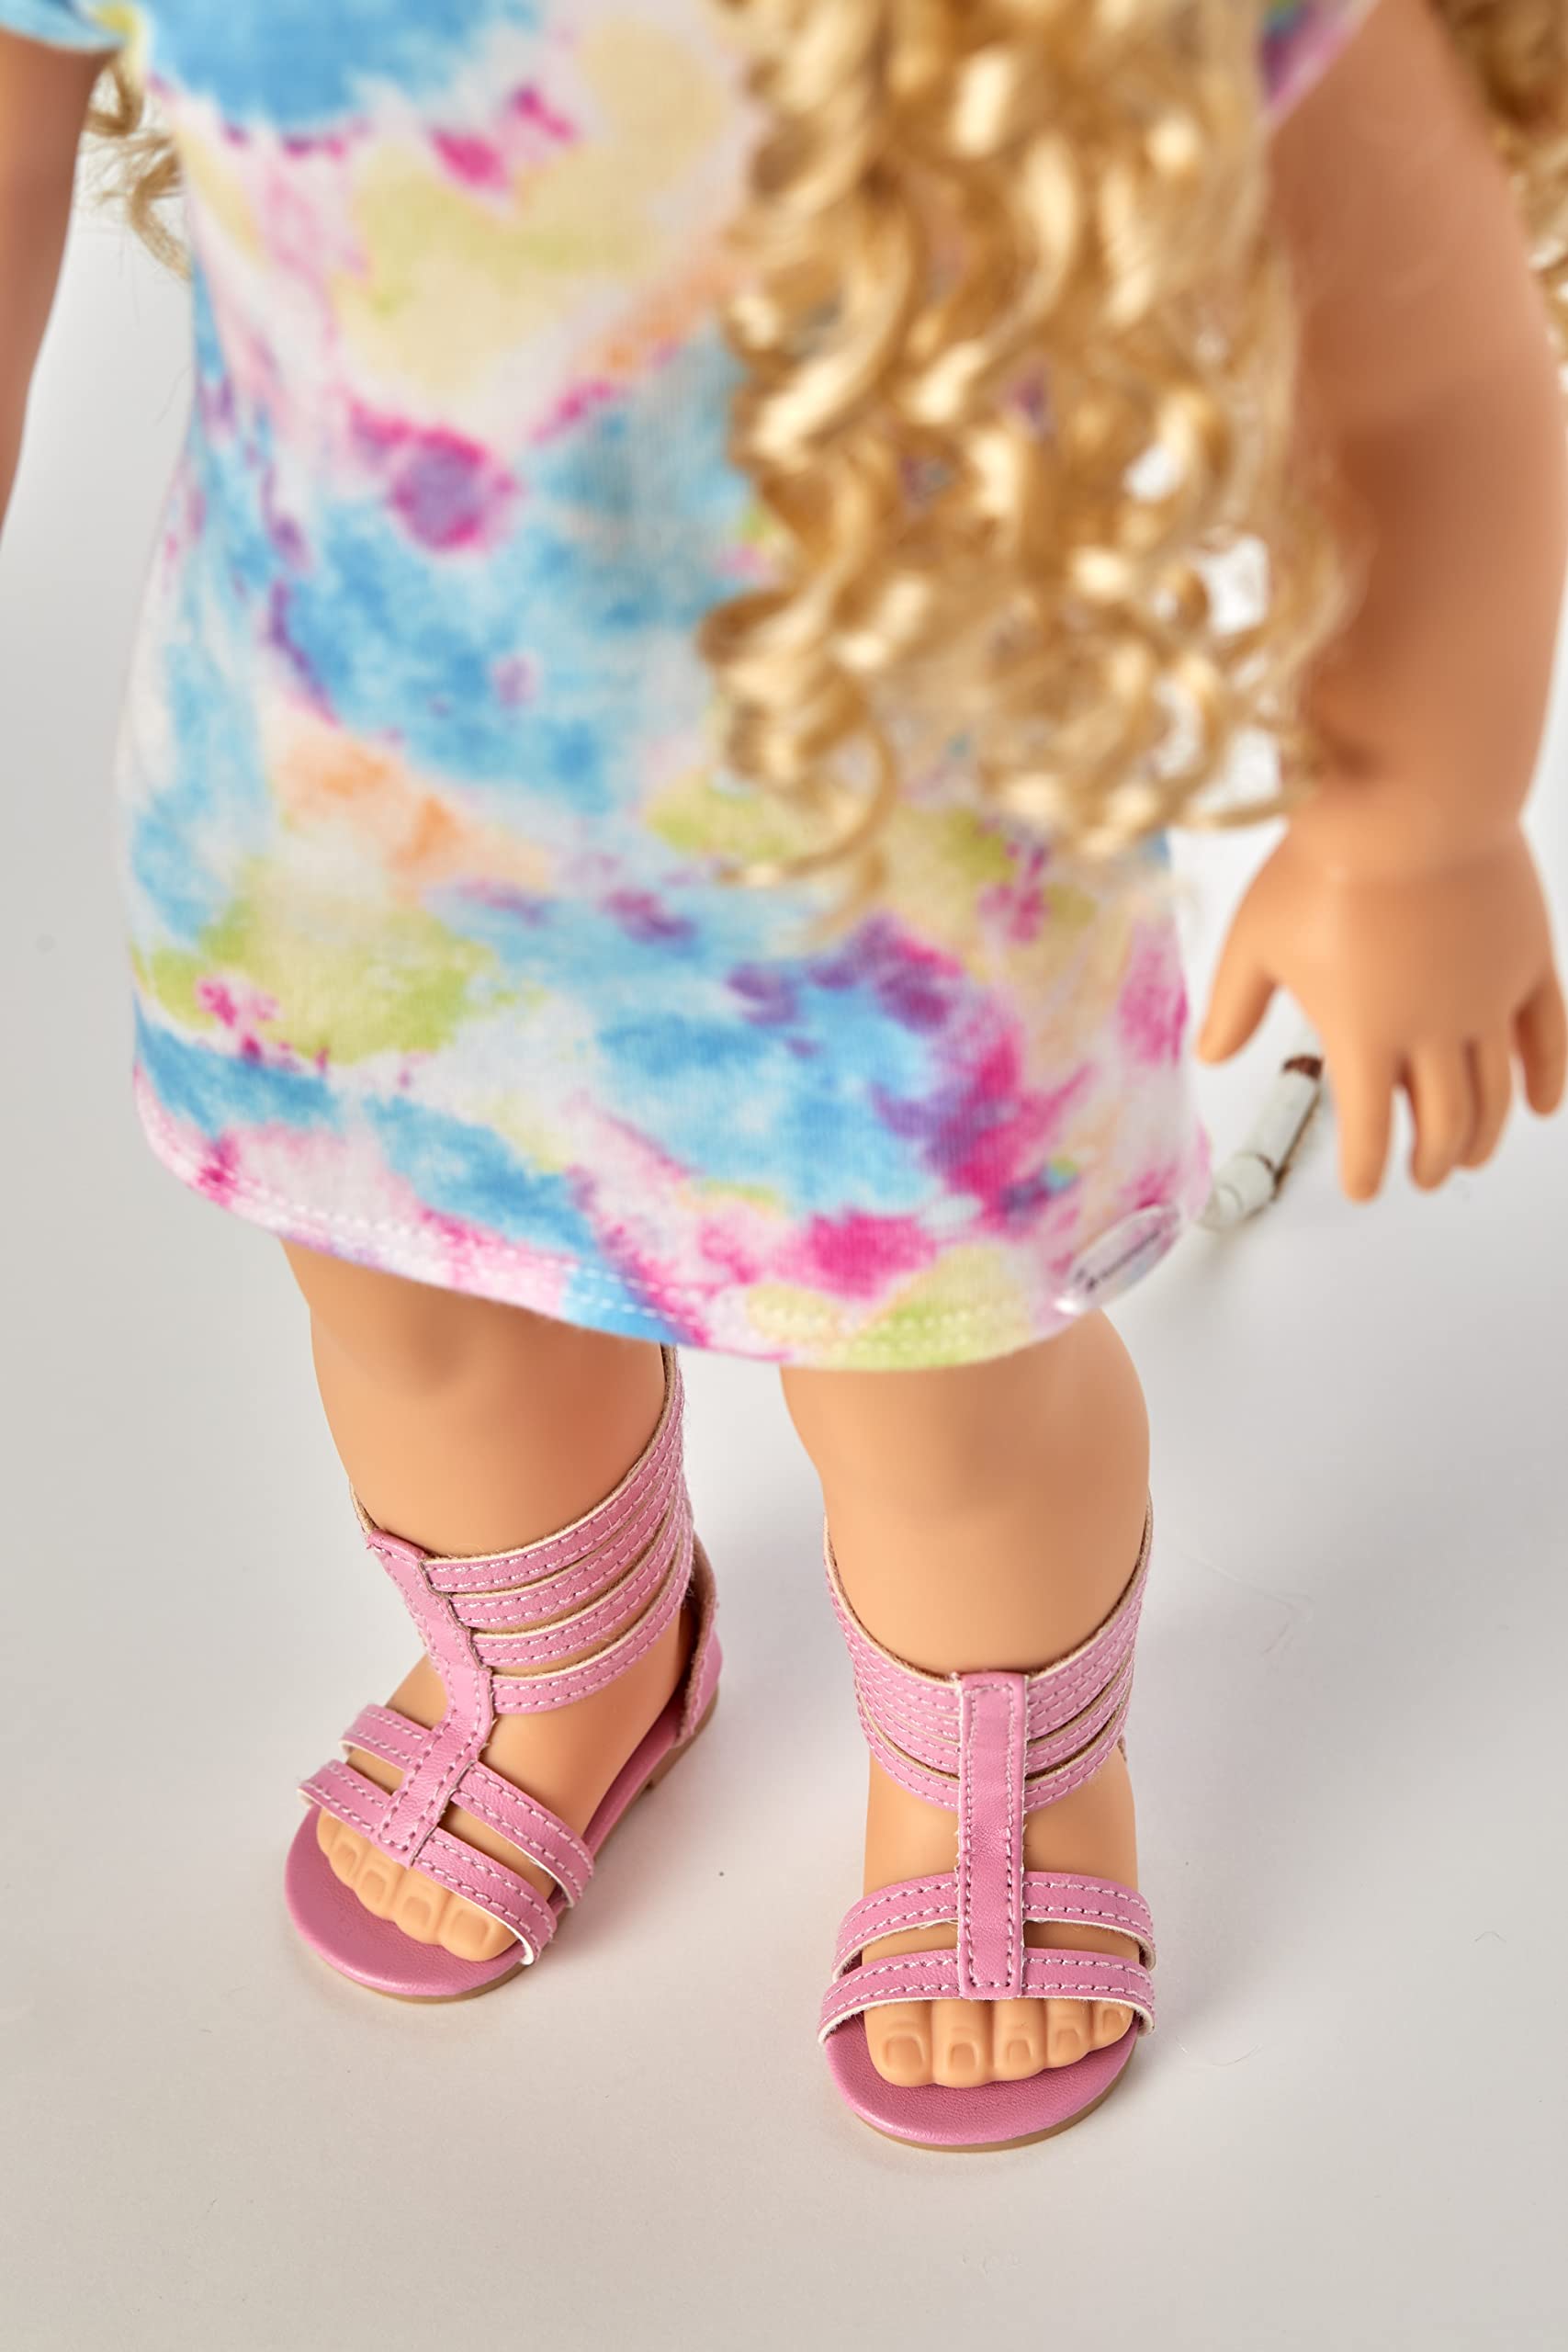 American Girl Truly Me Show Your Artsy Side Outfit for 18-inch Dolls with Tie Dye T-Shirt Dress